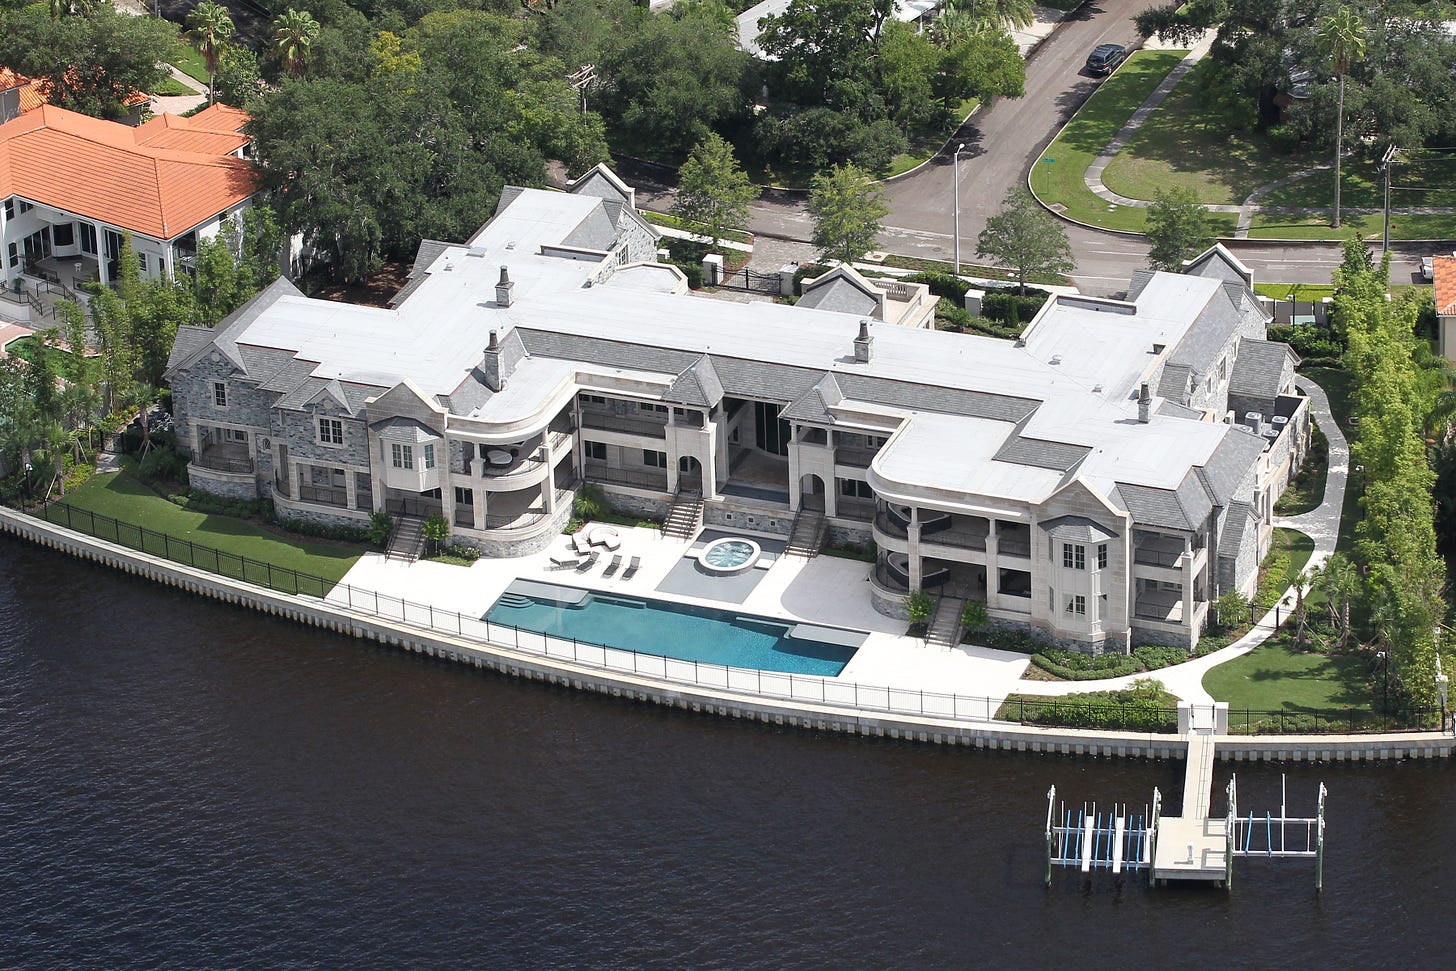 Tom Brady moves into Derek Jeter's $14M Tampa mansion after signing $50M  contract with Buccaneers | The Sun